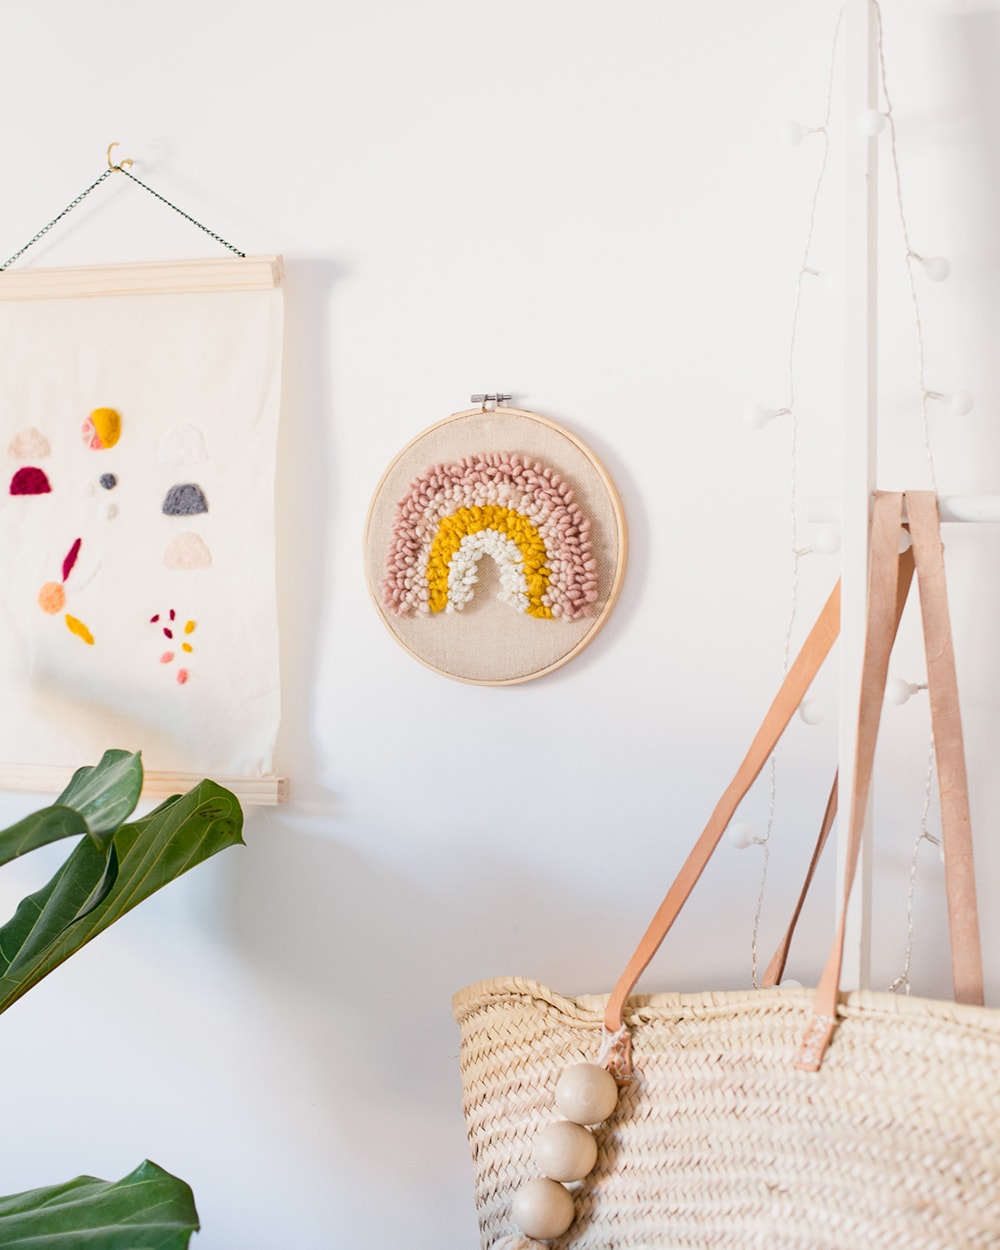 Craft bag and sewing items on wall